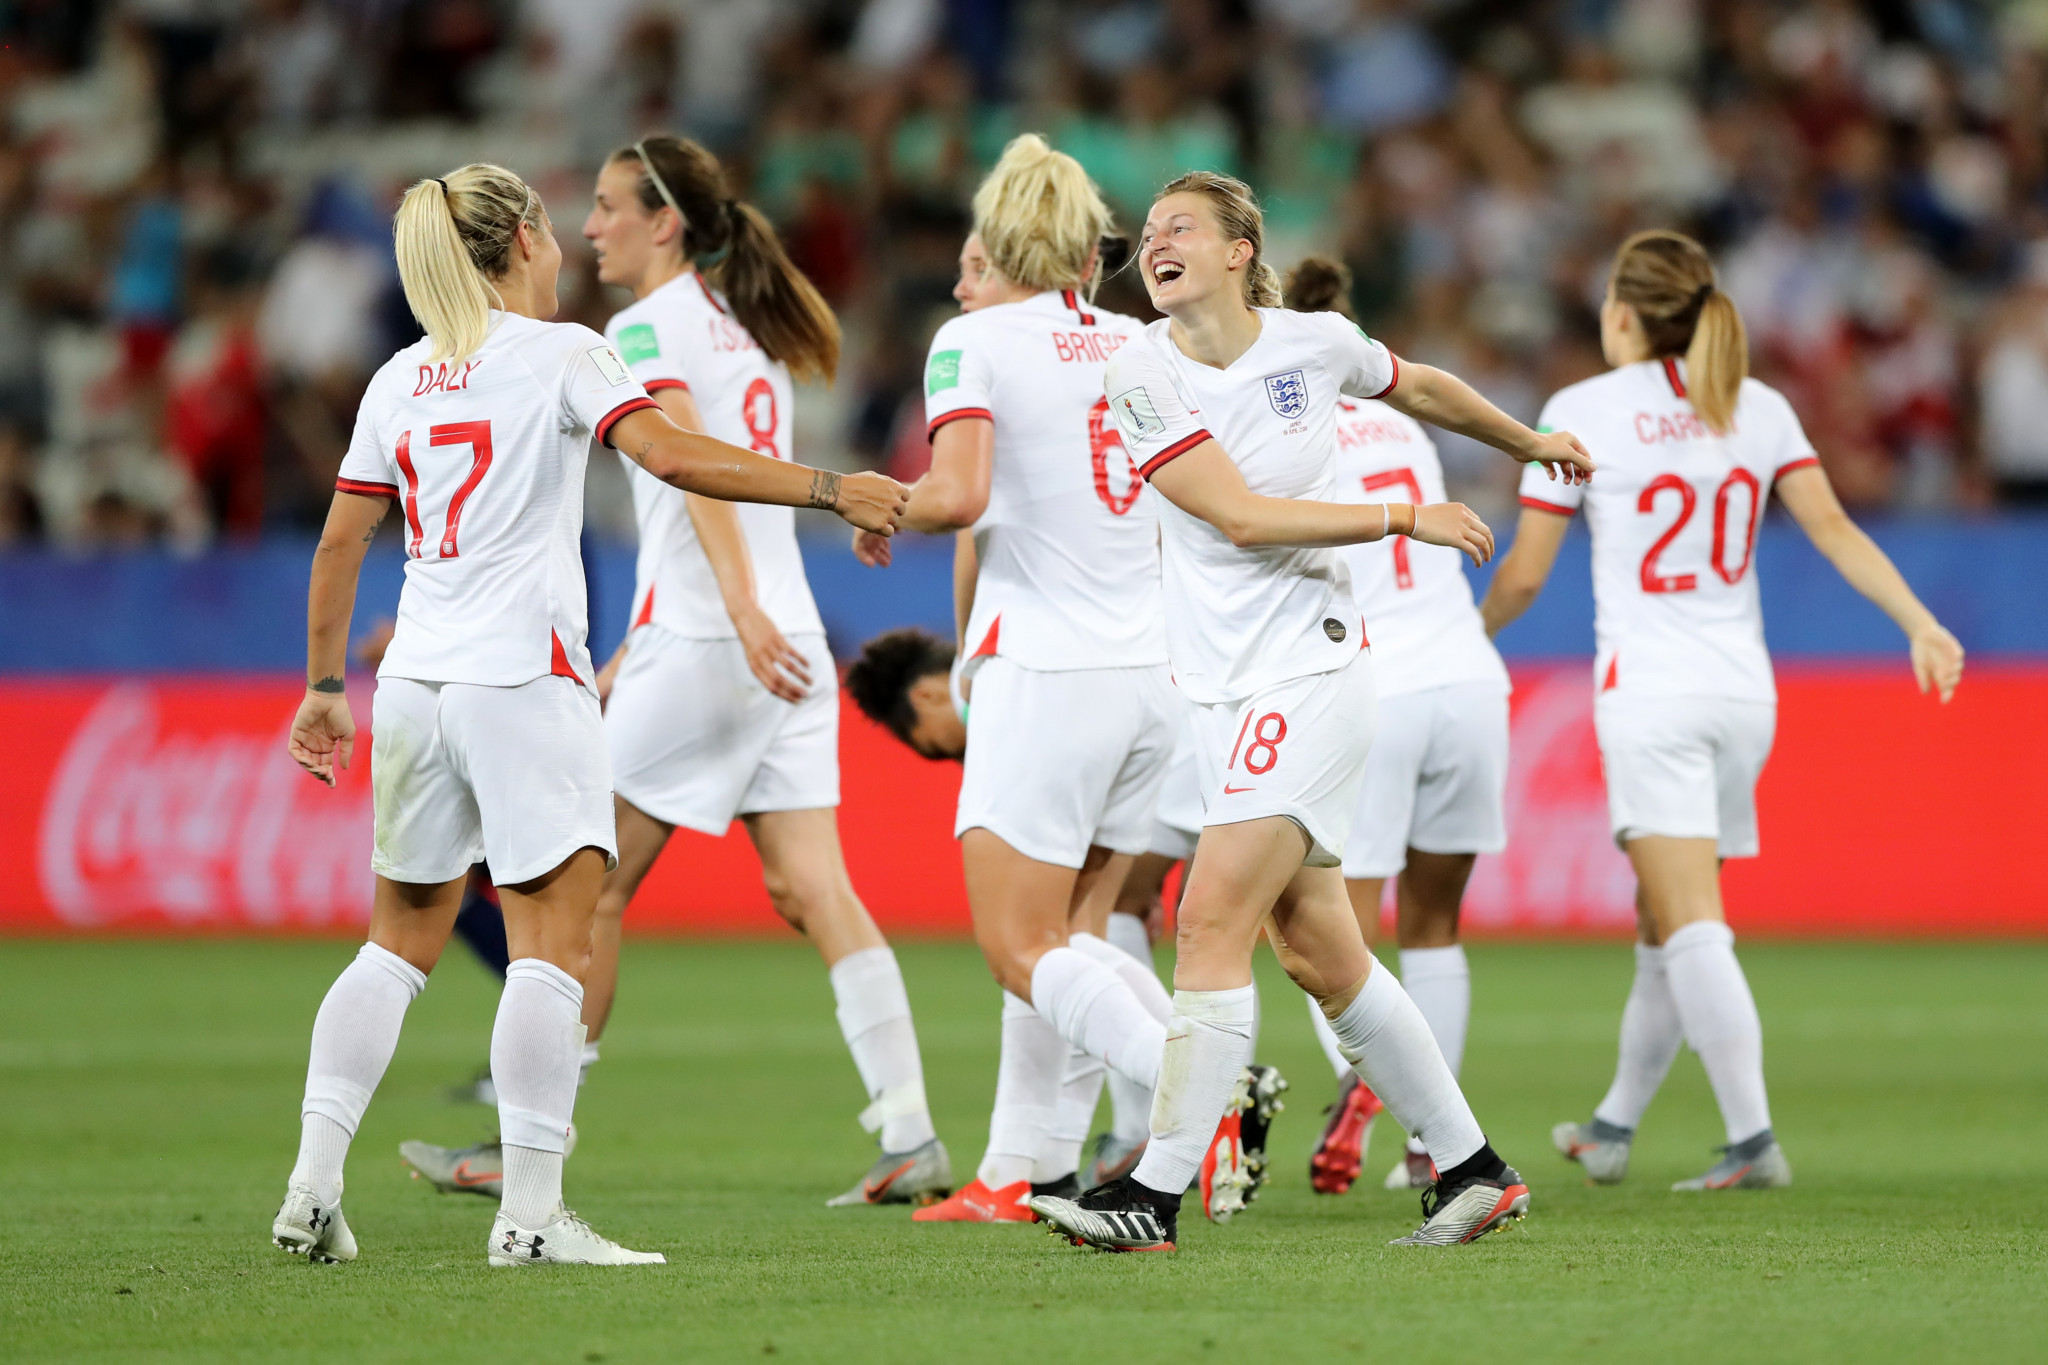 England's win meant they qualified for the round-of-16 as the top team in Group D ©Getty Images